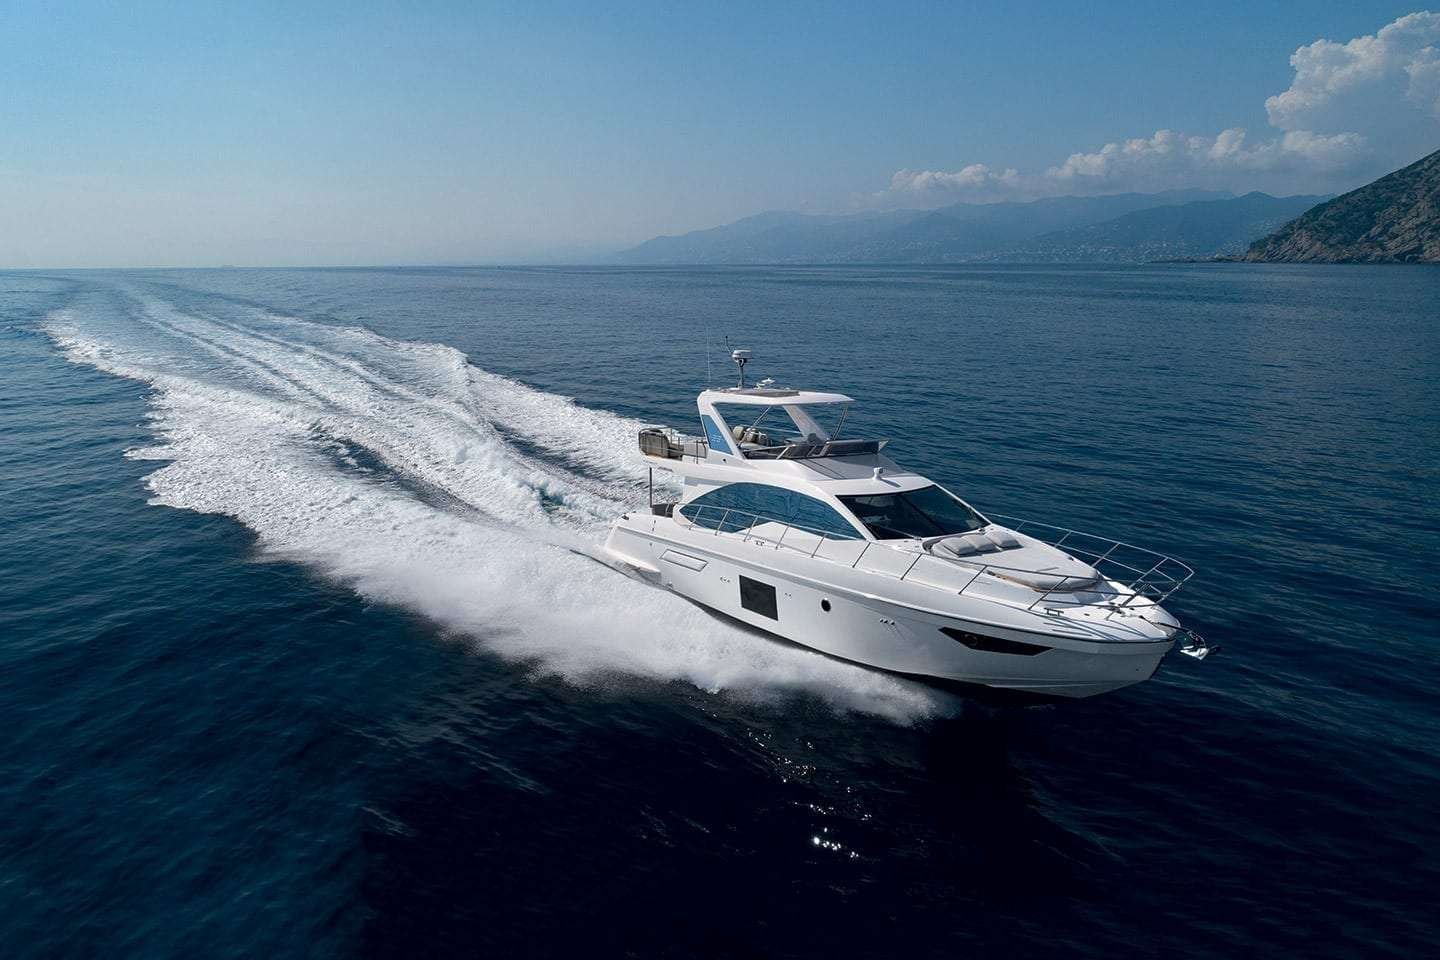 Azimut 55 Luxury Motor yacht with Skipper for charter Split Croatia - Up to 6 guests